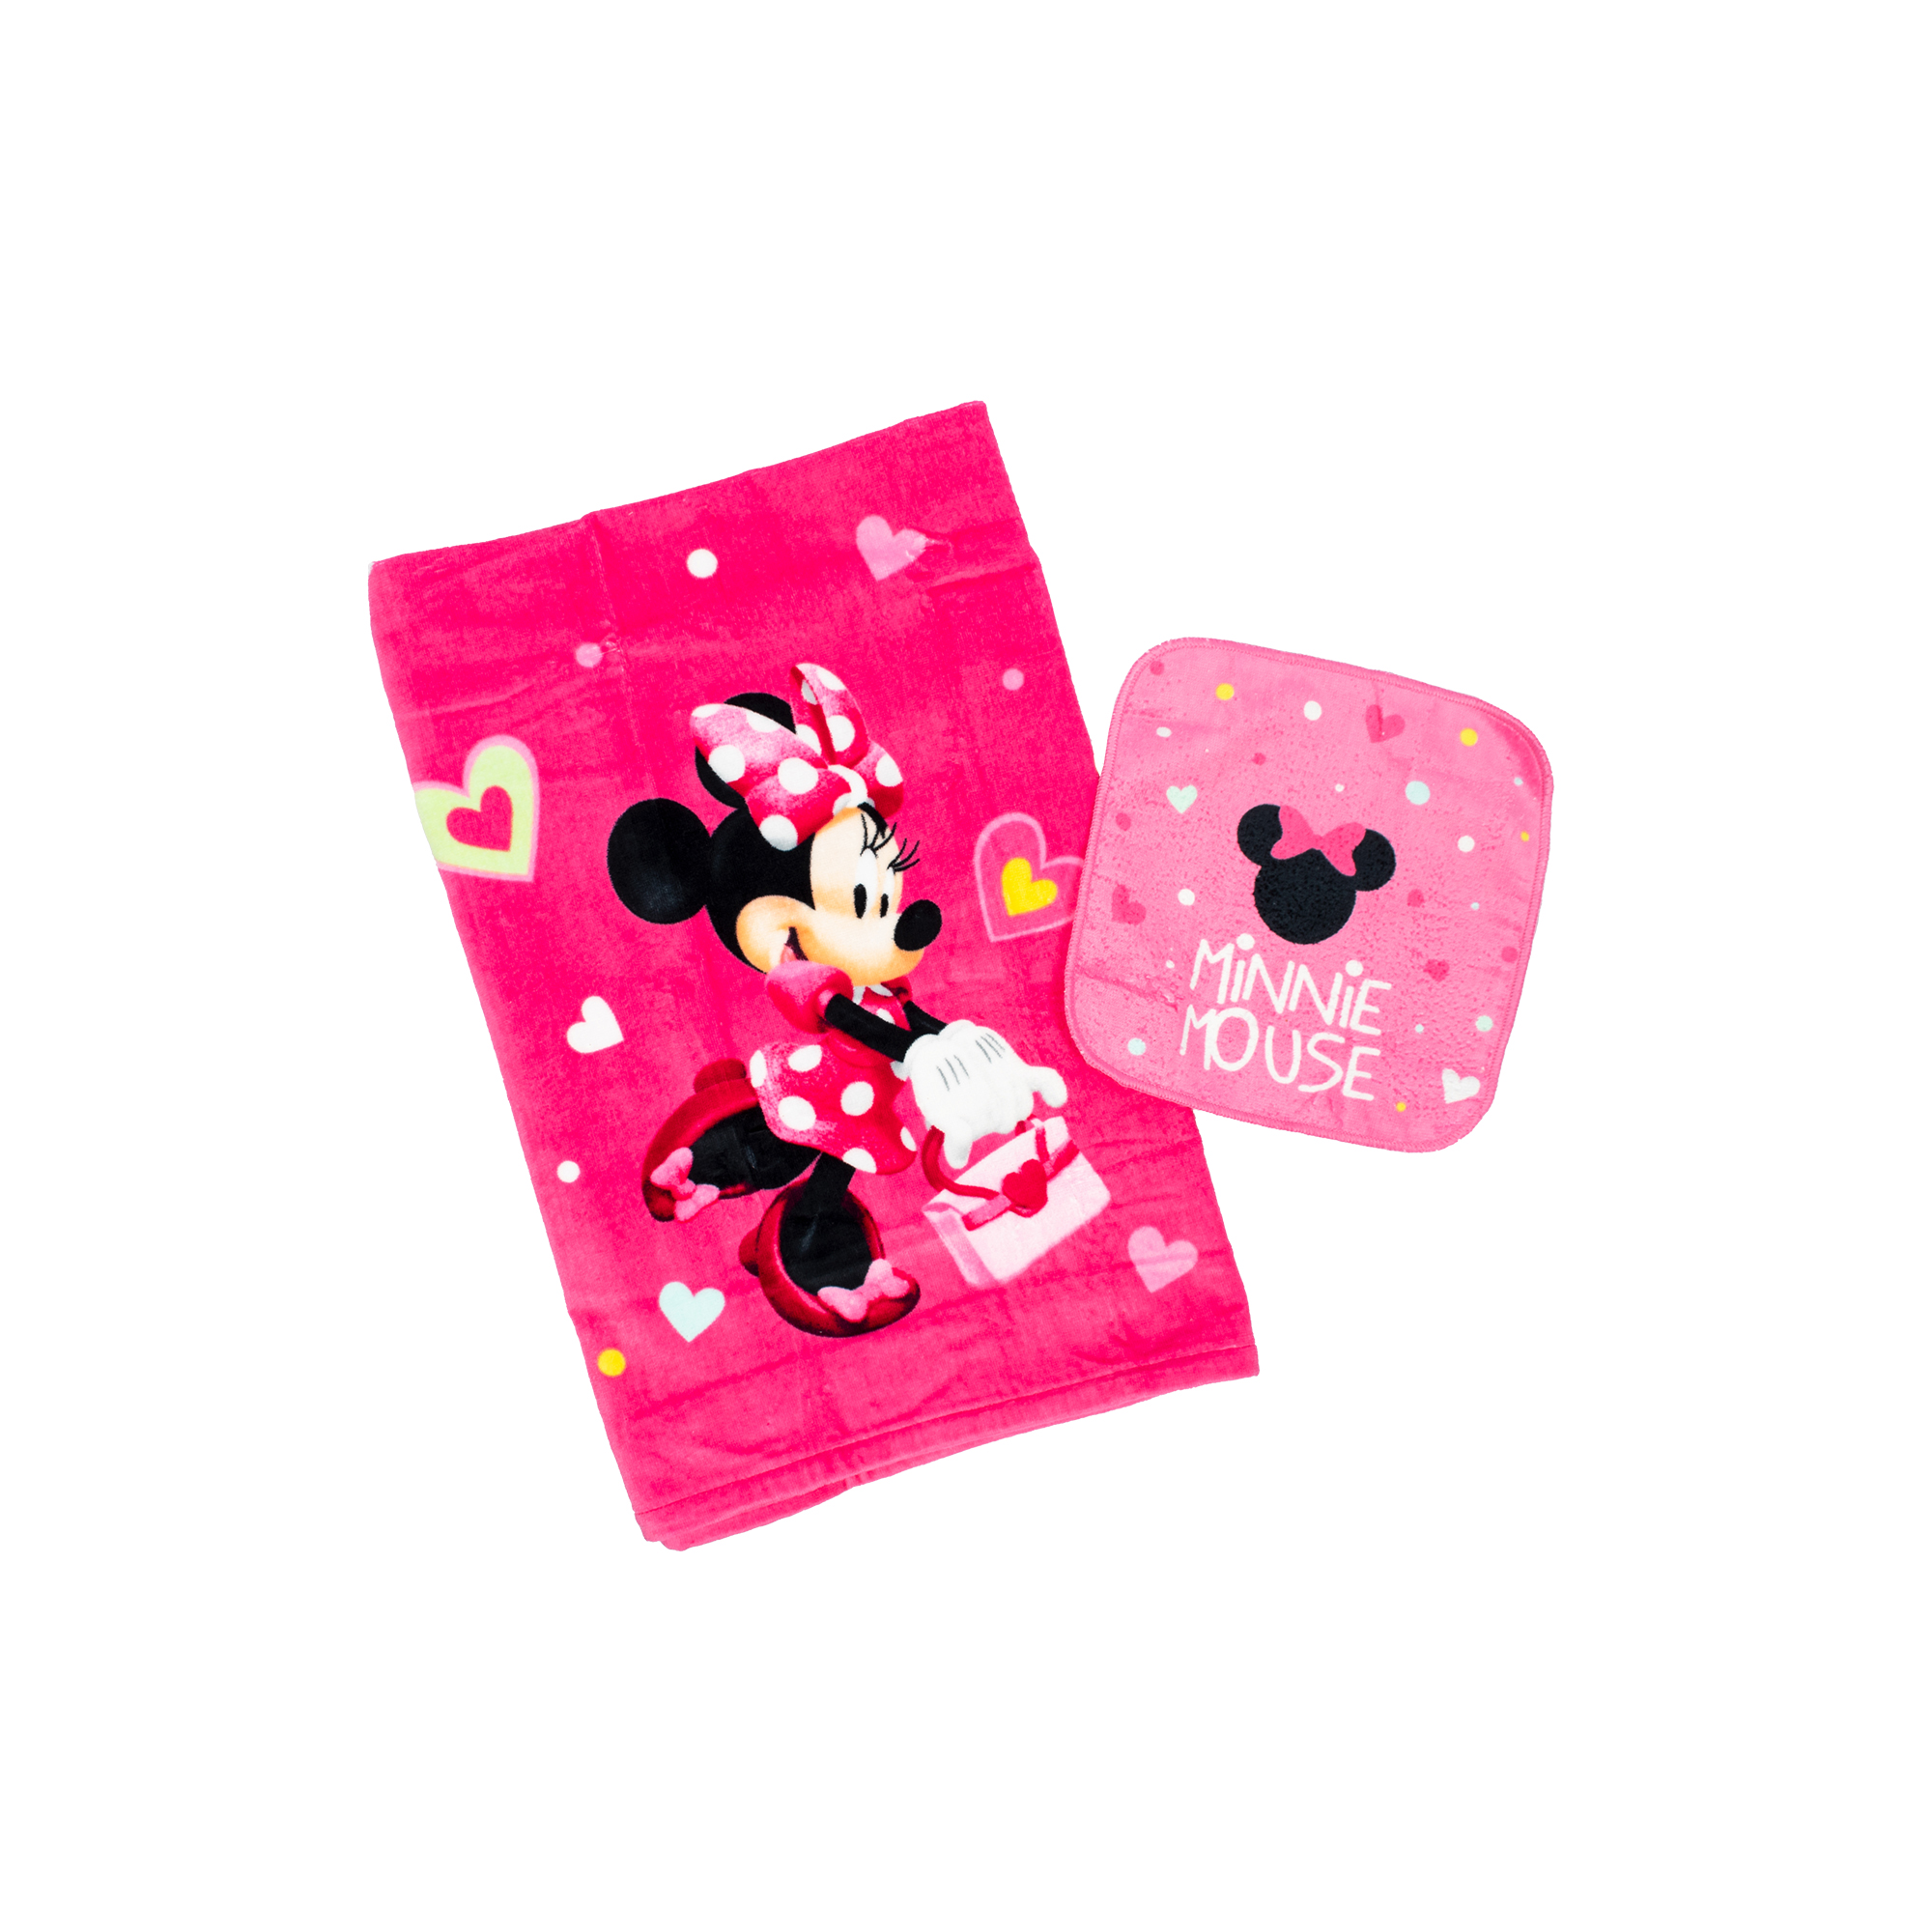 Minnie Mouse Kids Cotton 2 Piece Towel and Washcloth Set - image 2 of 8